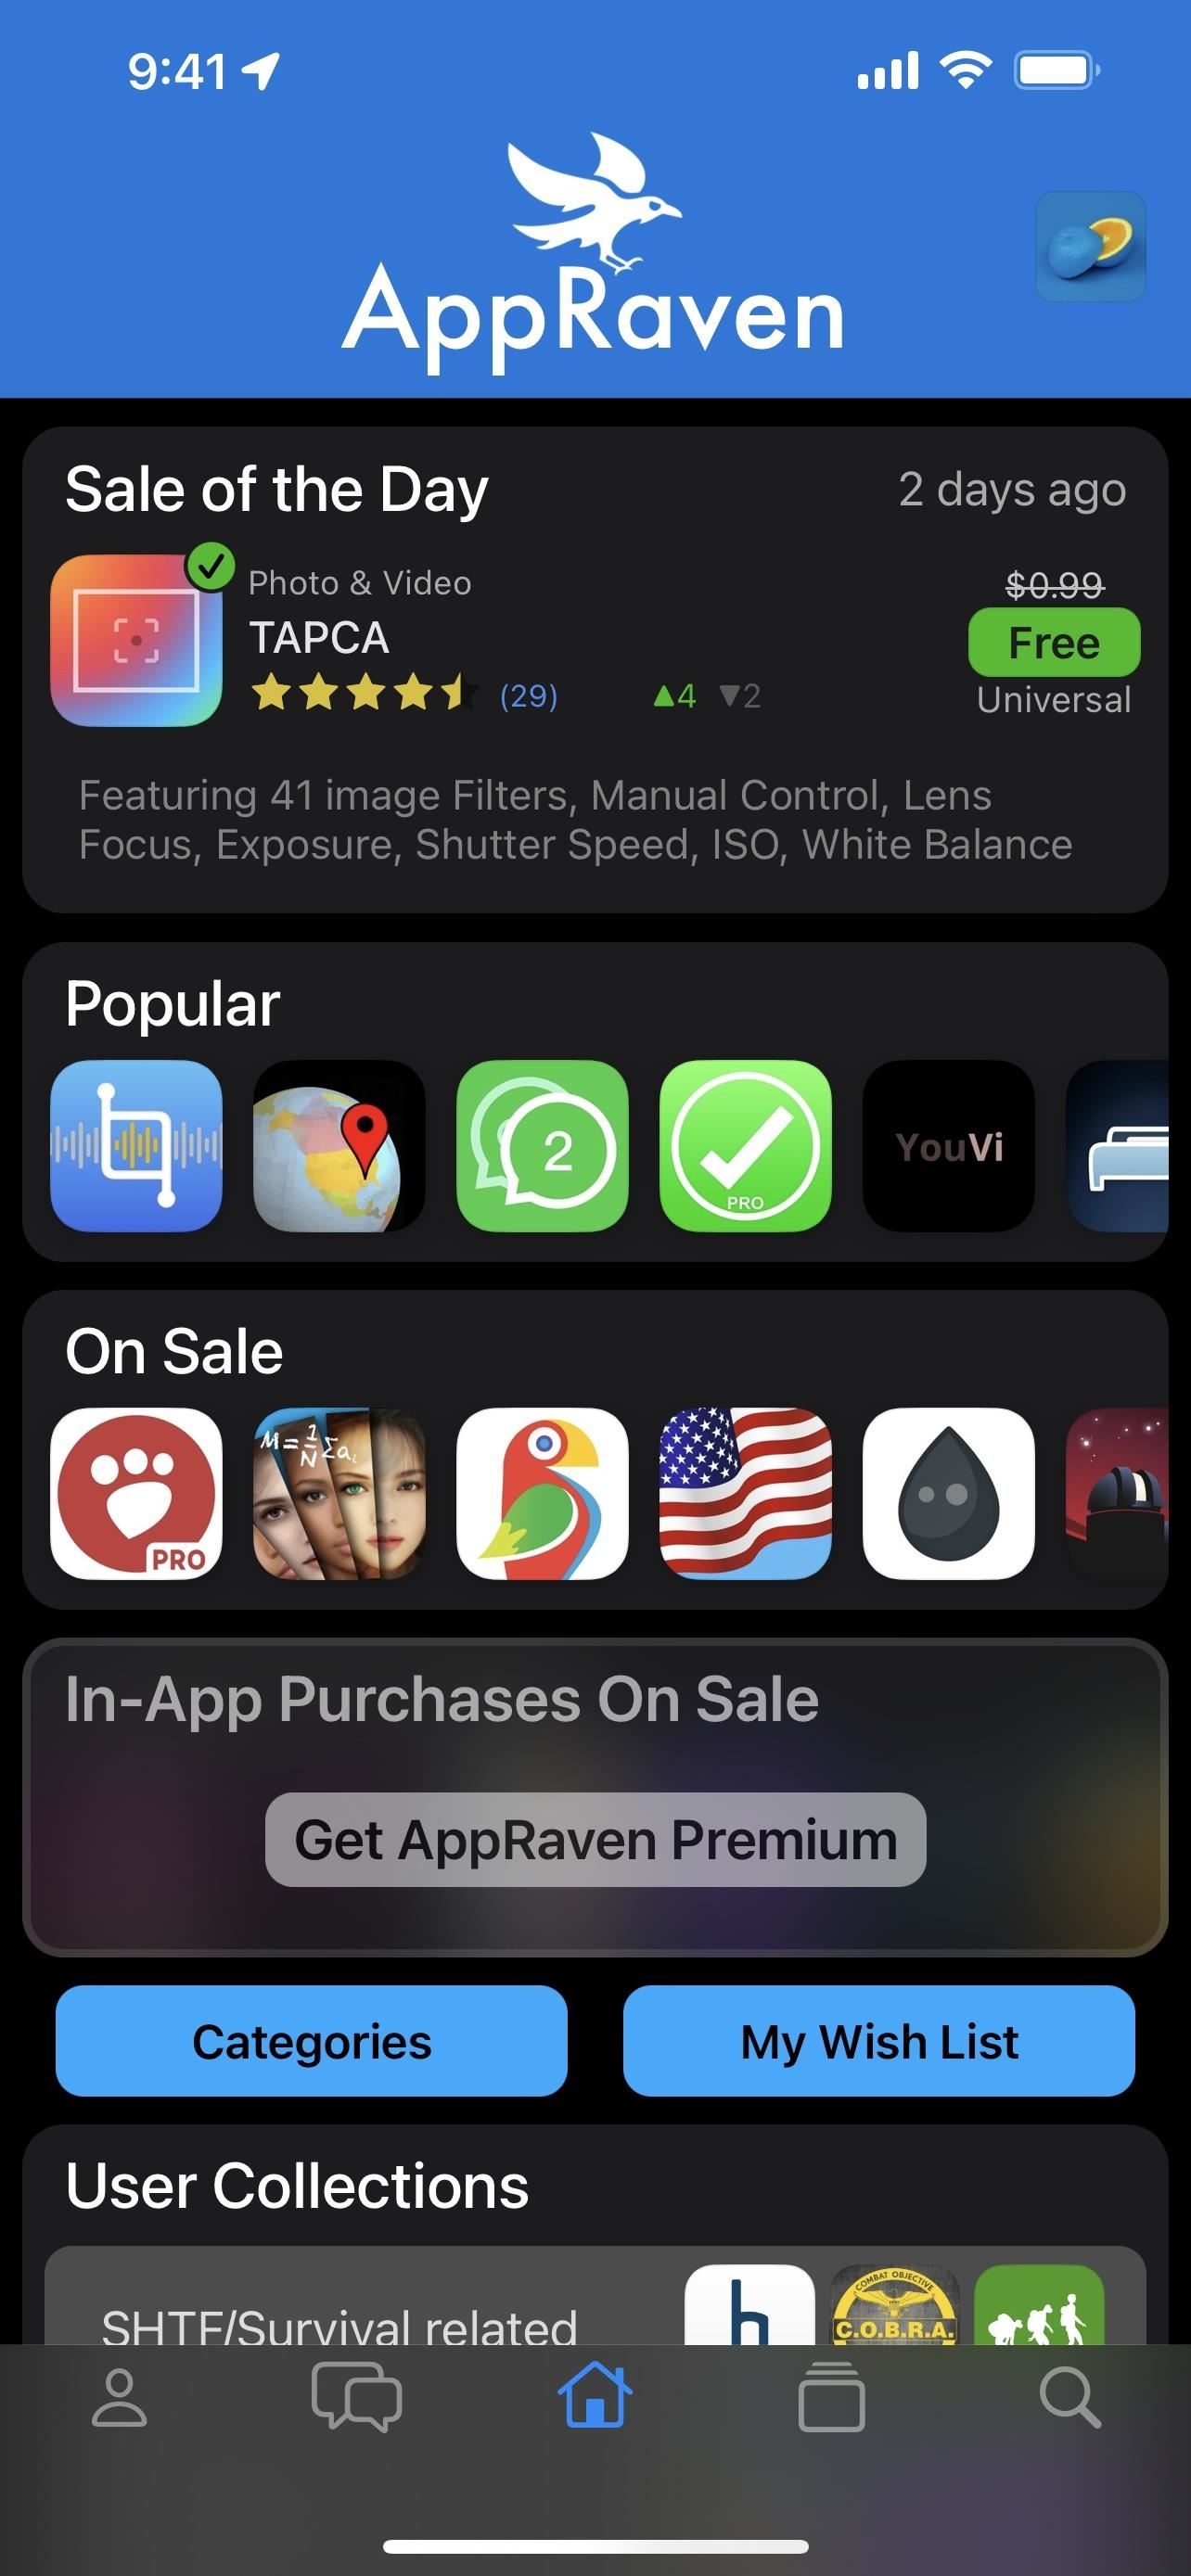 Use These Price Trackers to Find On-Sale and Newly Free Apps for Your iPhone or iPad